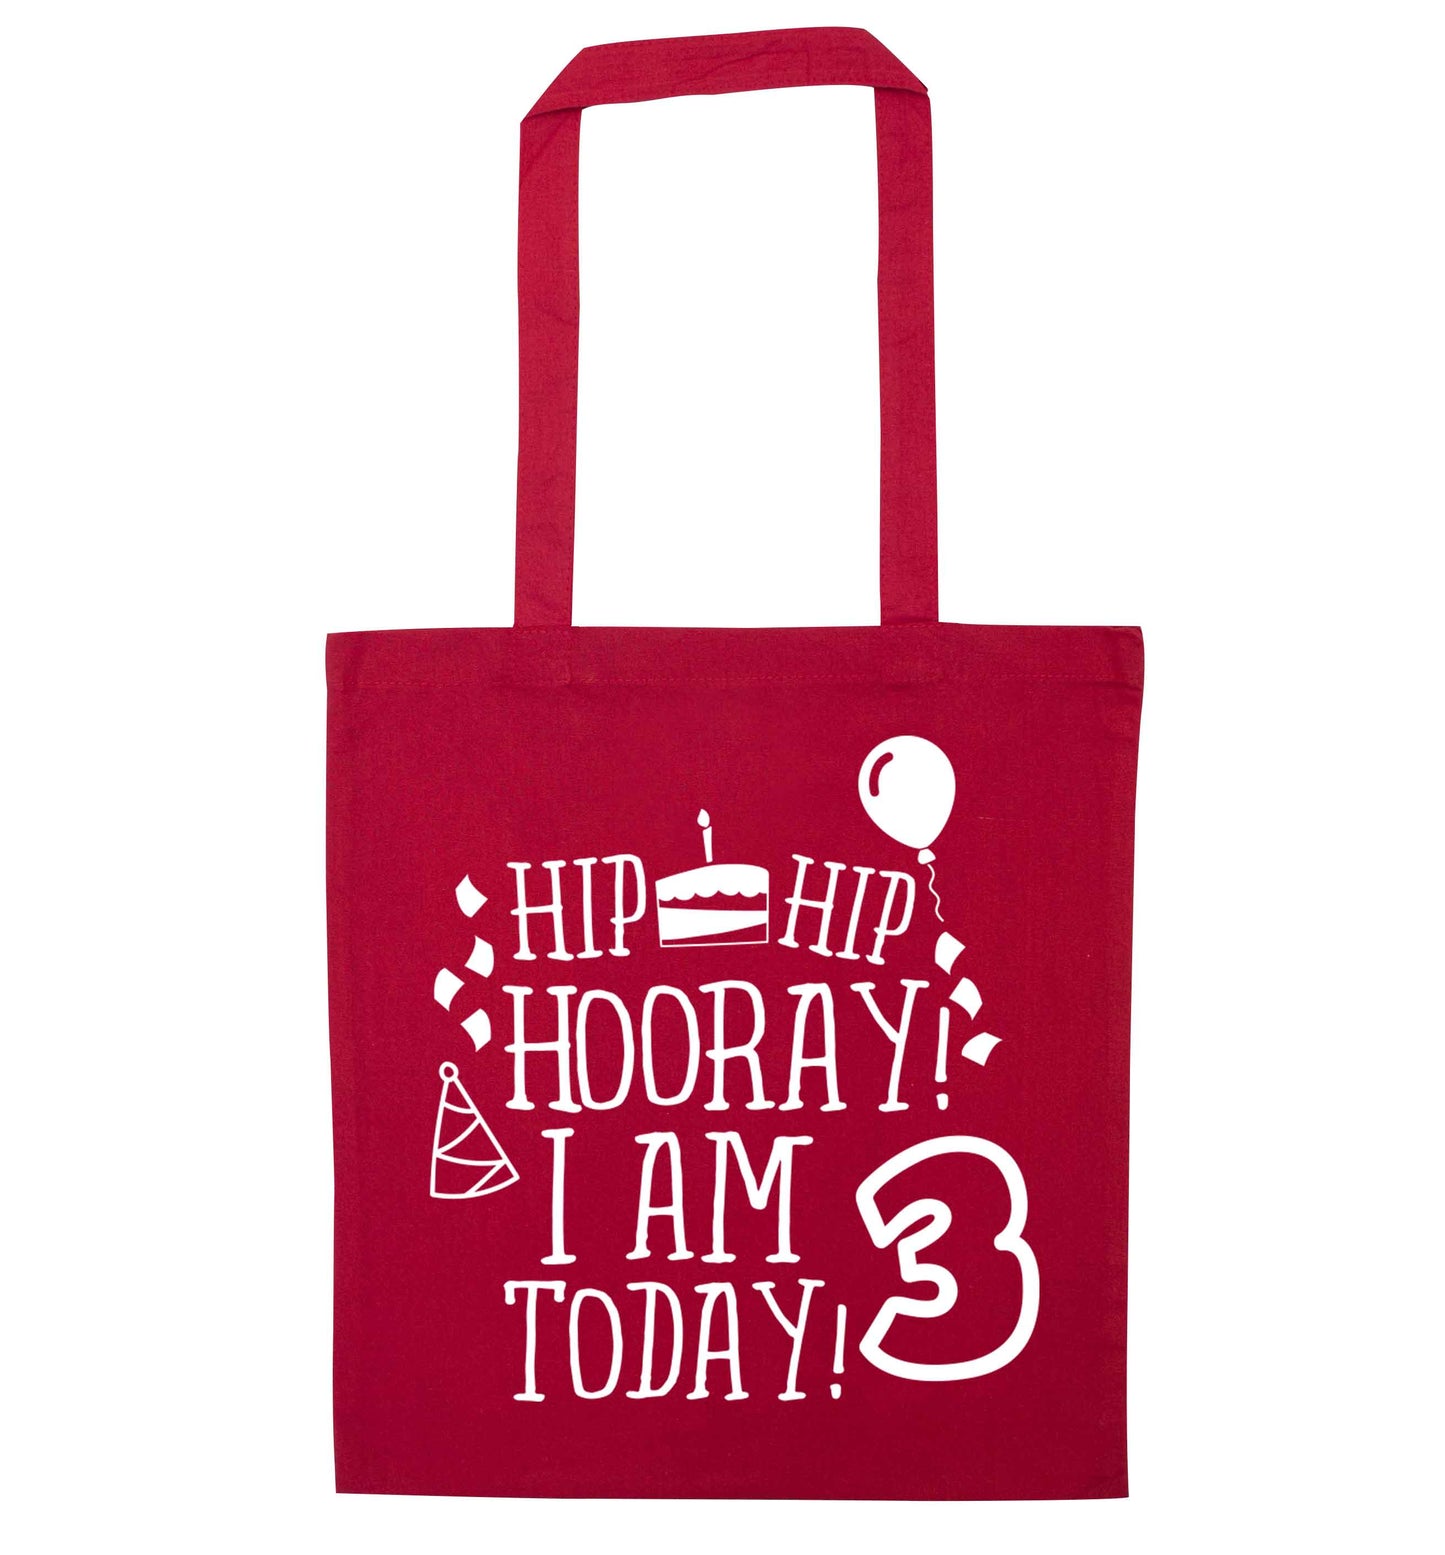 Hip hip hooray I'm 3 today! red tote bag